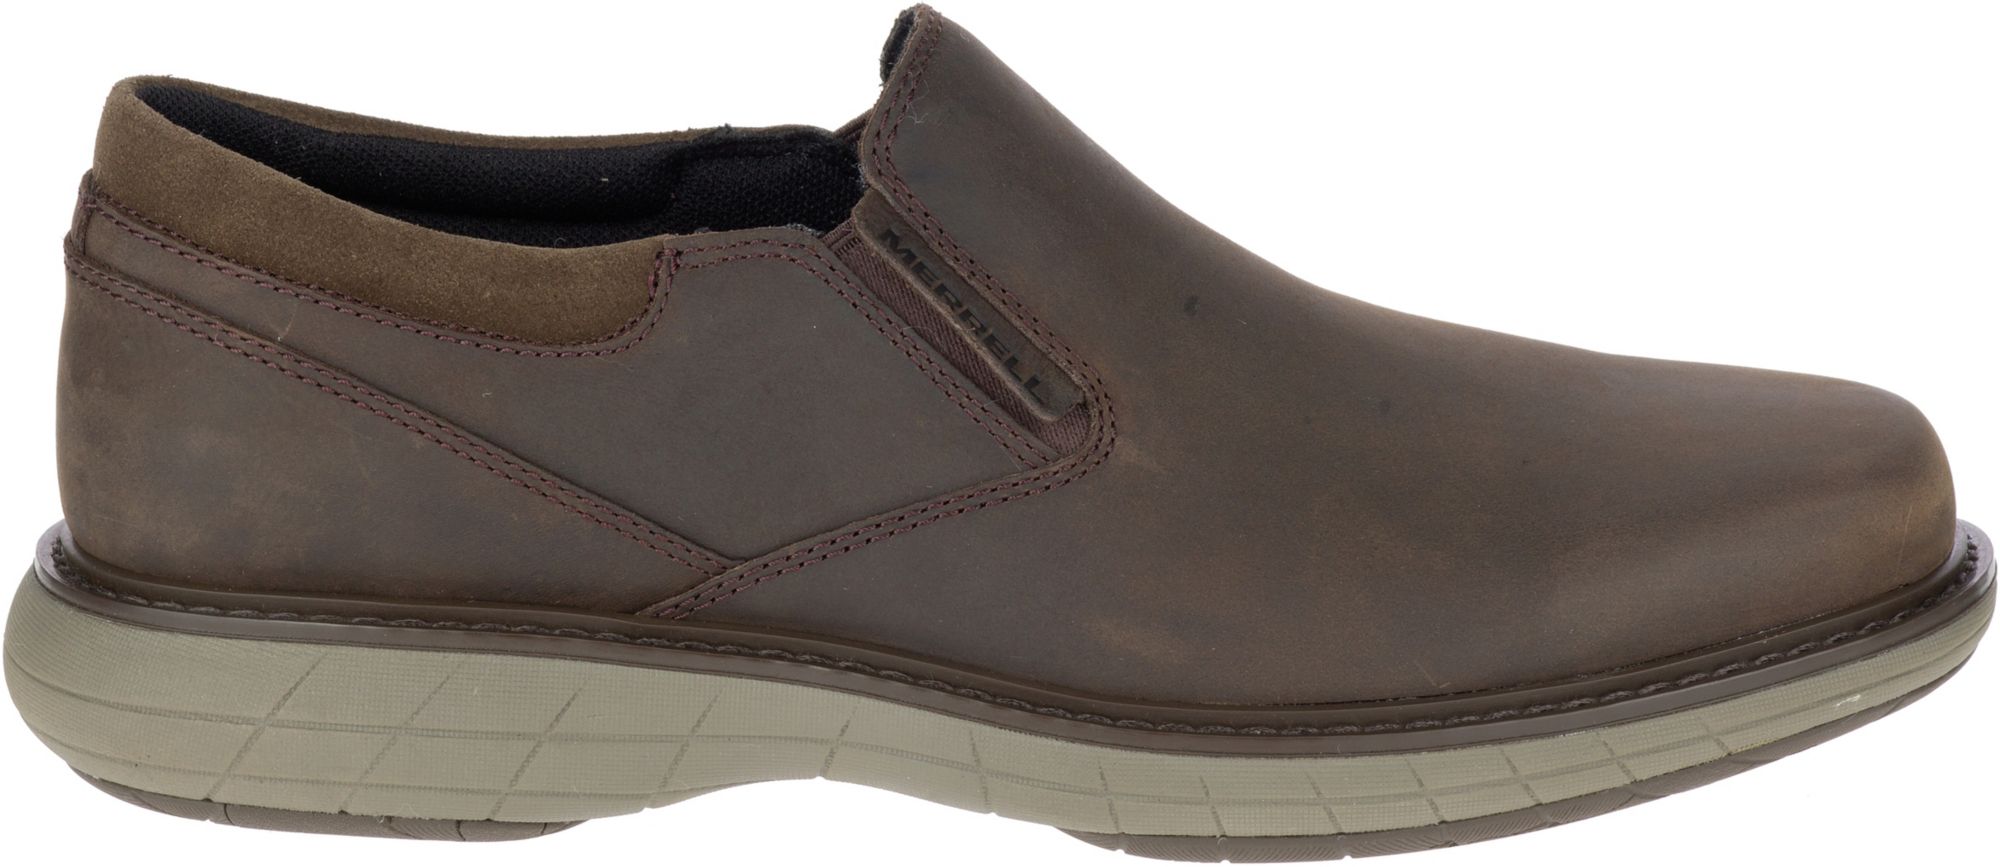 merrell men's world vue moc casual shoes - image 1 of 8